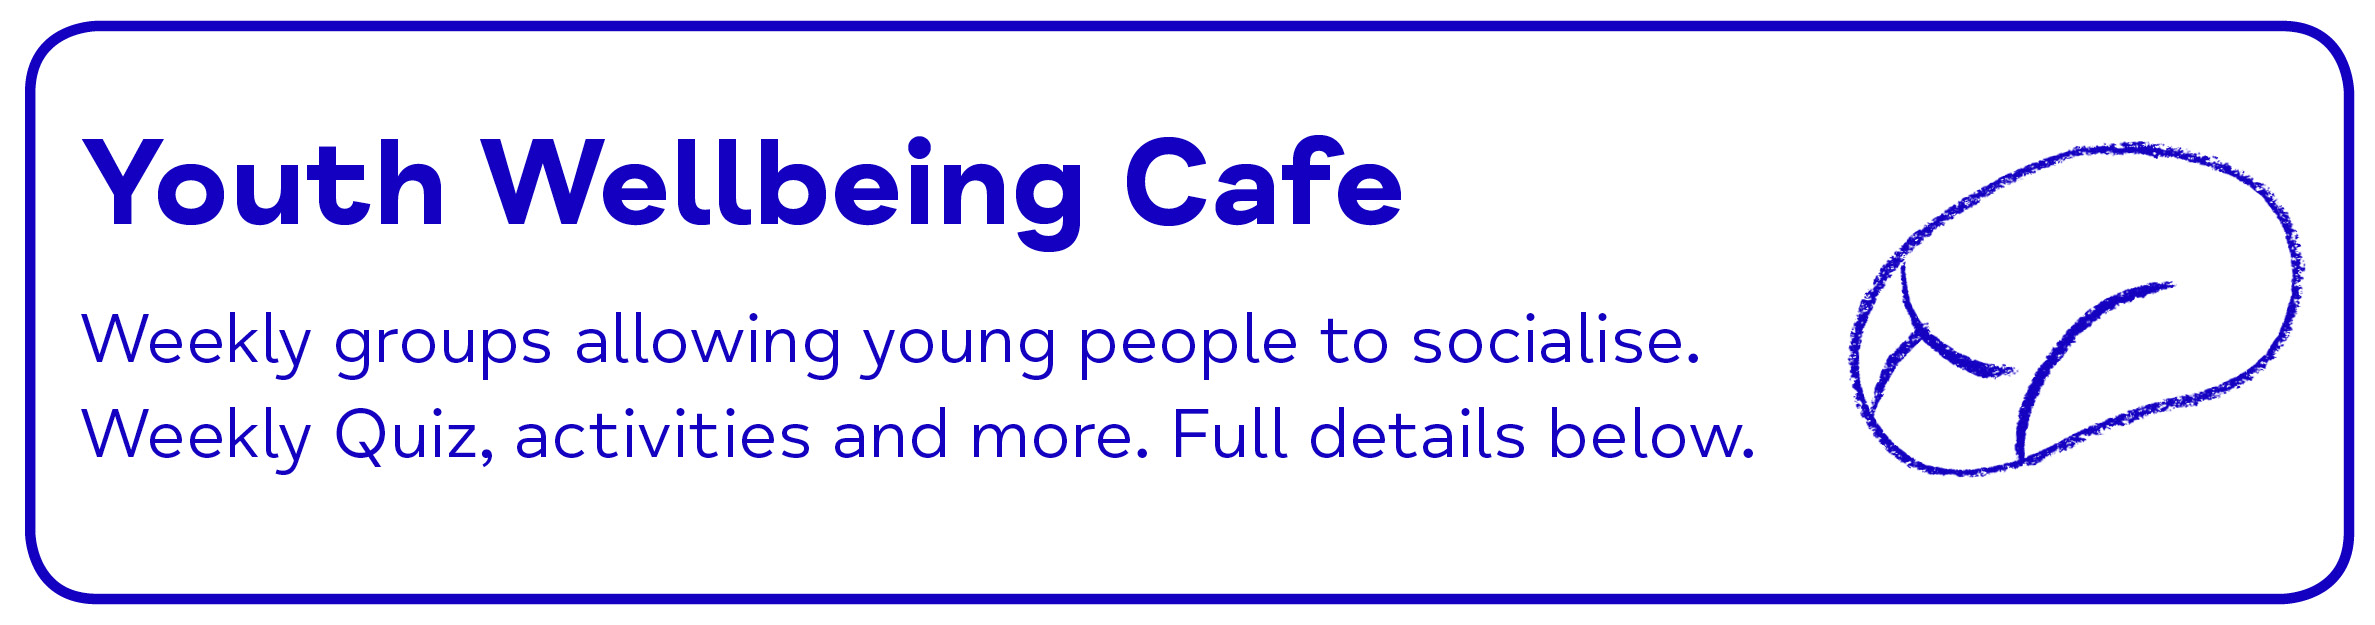 Youth Wellbeing Cafe Weekly groups allowing young people to socialise. Weekly Quiz, activities and more. Full details below.